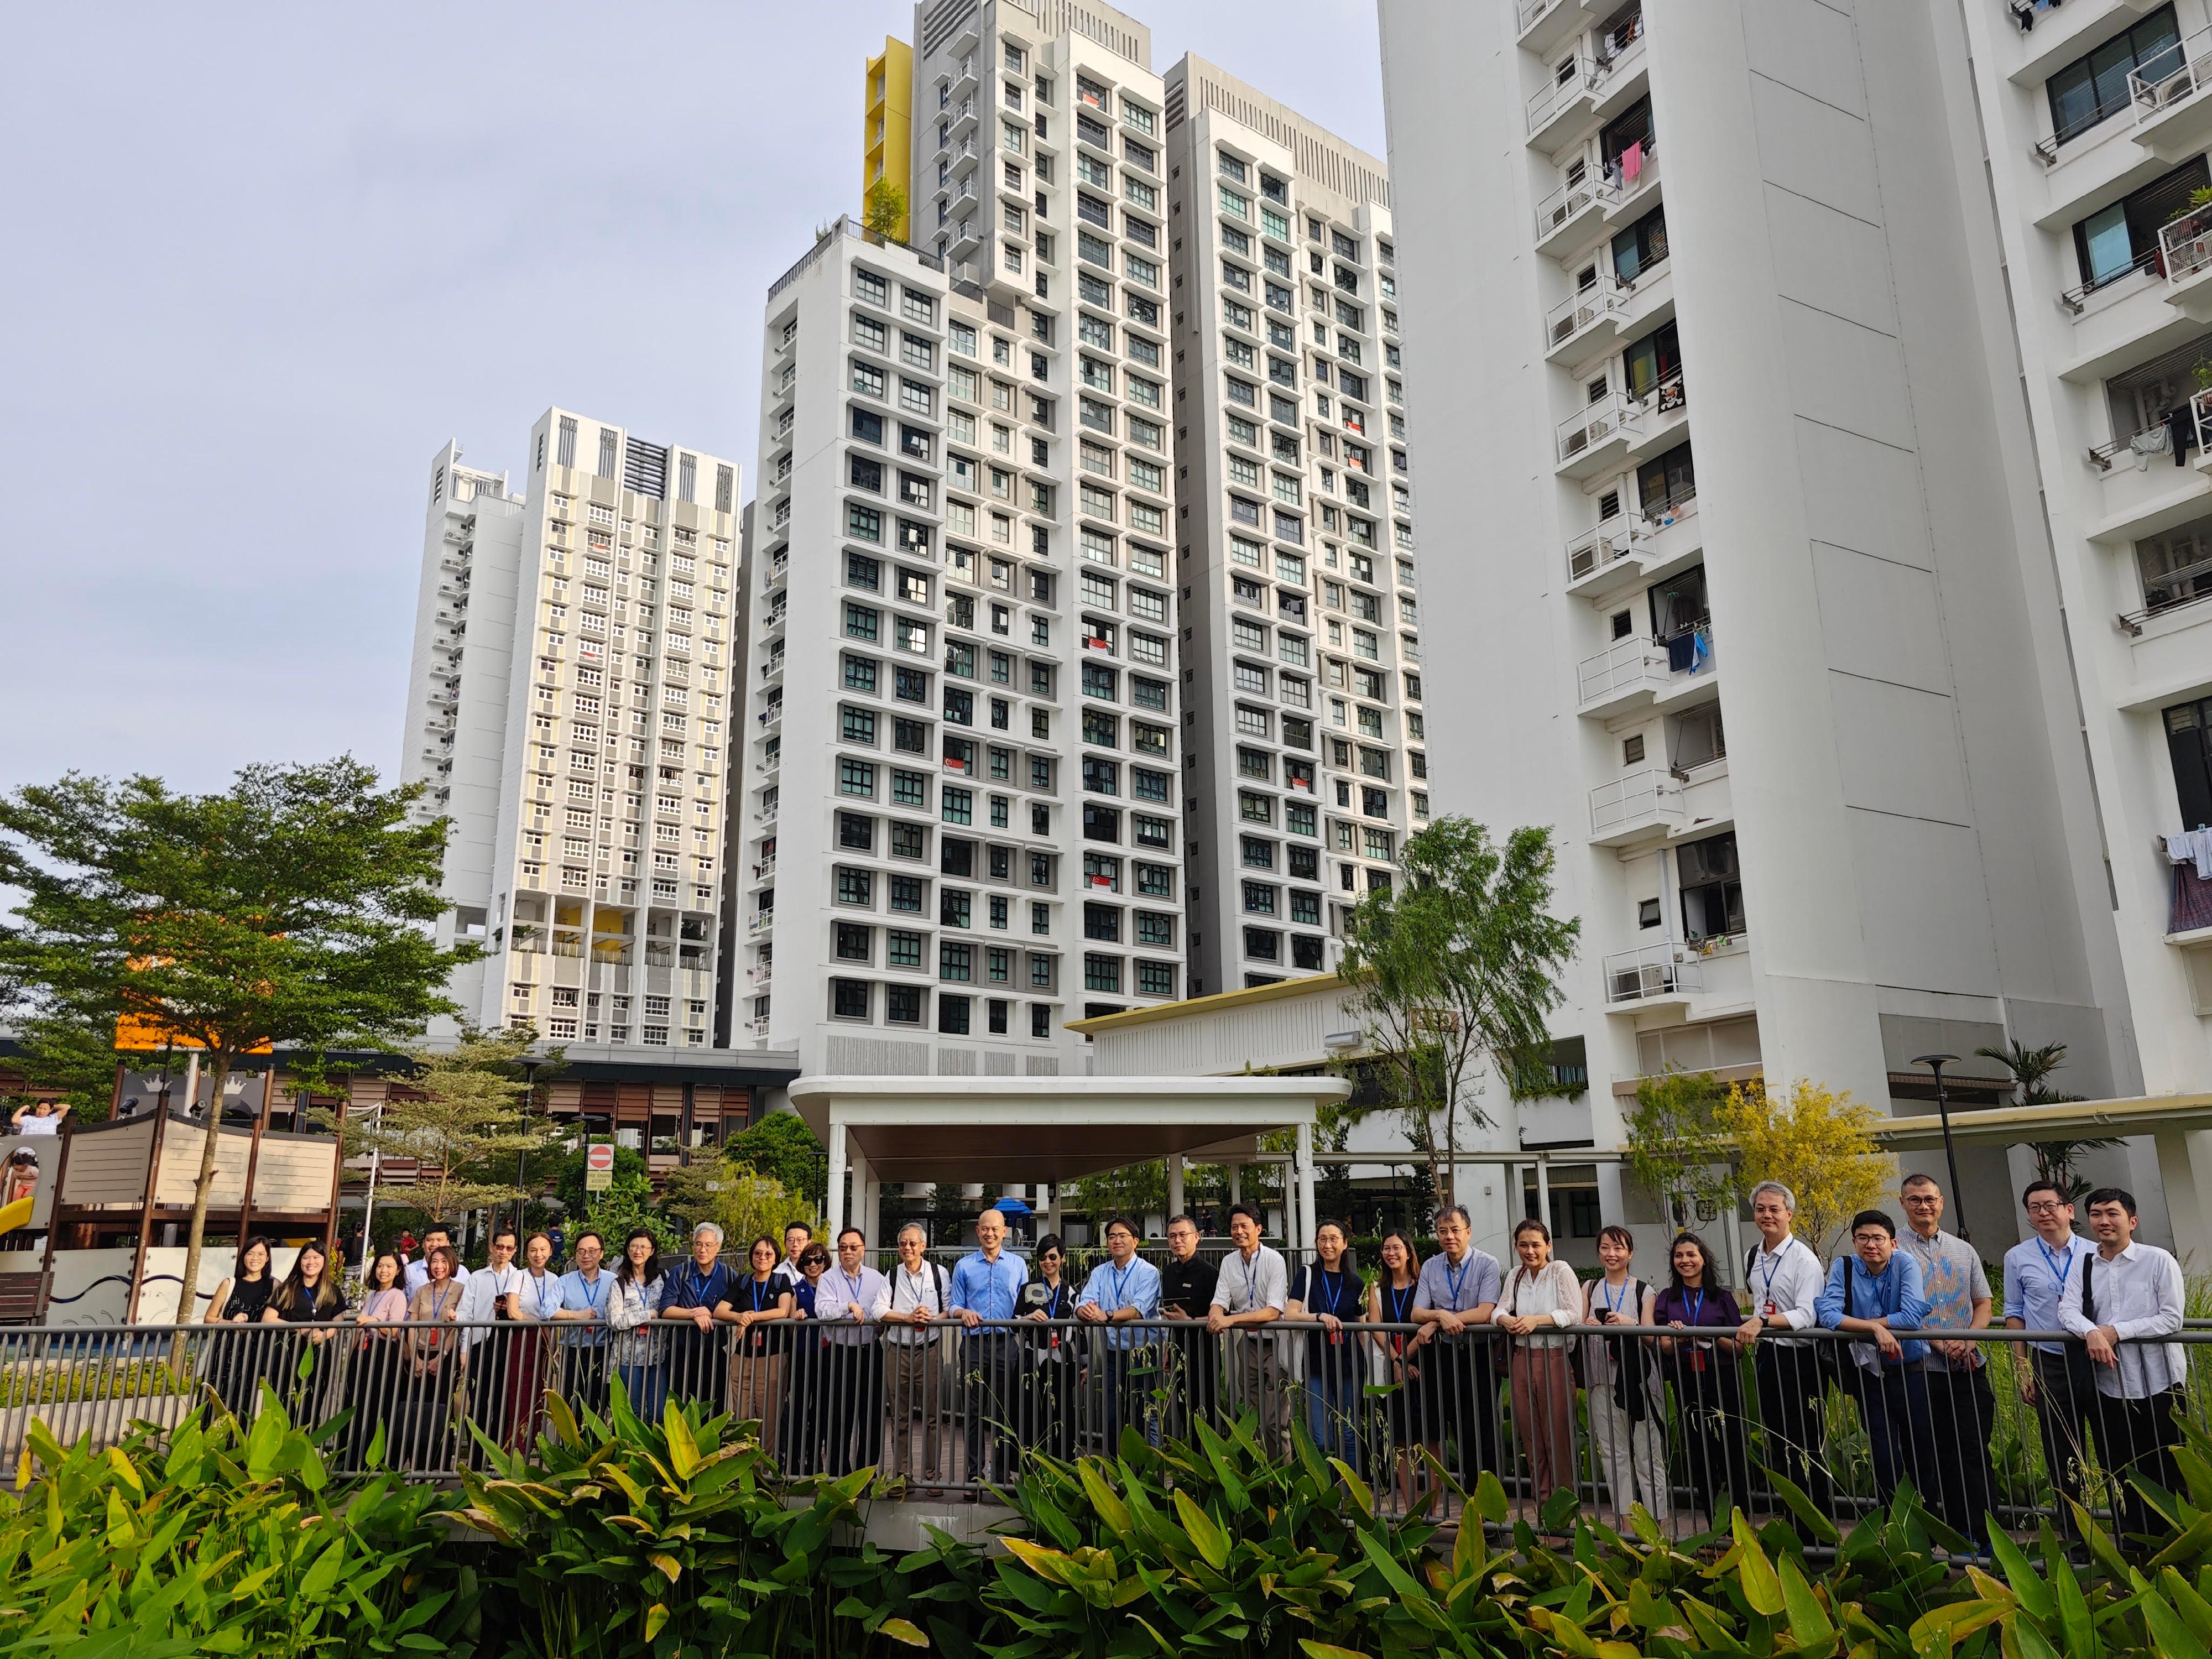 The Secretary for Housing, Ms Winnie Ho, began her visit to Singapore yesterday (August 22). She met with local government officials to exchange views in areas such as housing policies, innovative construction technologies and green building. Photo shows Ms Ho (centre) touring the Punggol Eco-Town today (August 23).